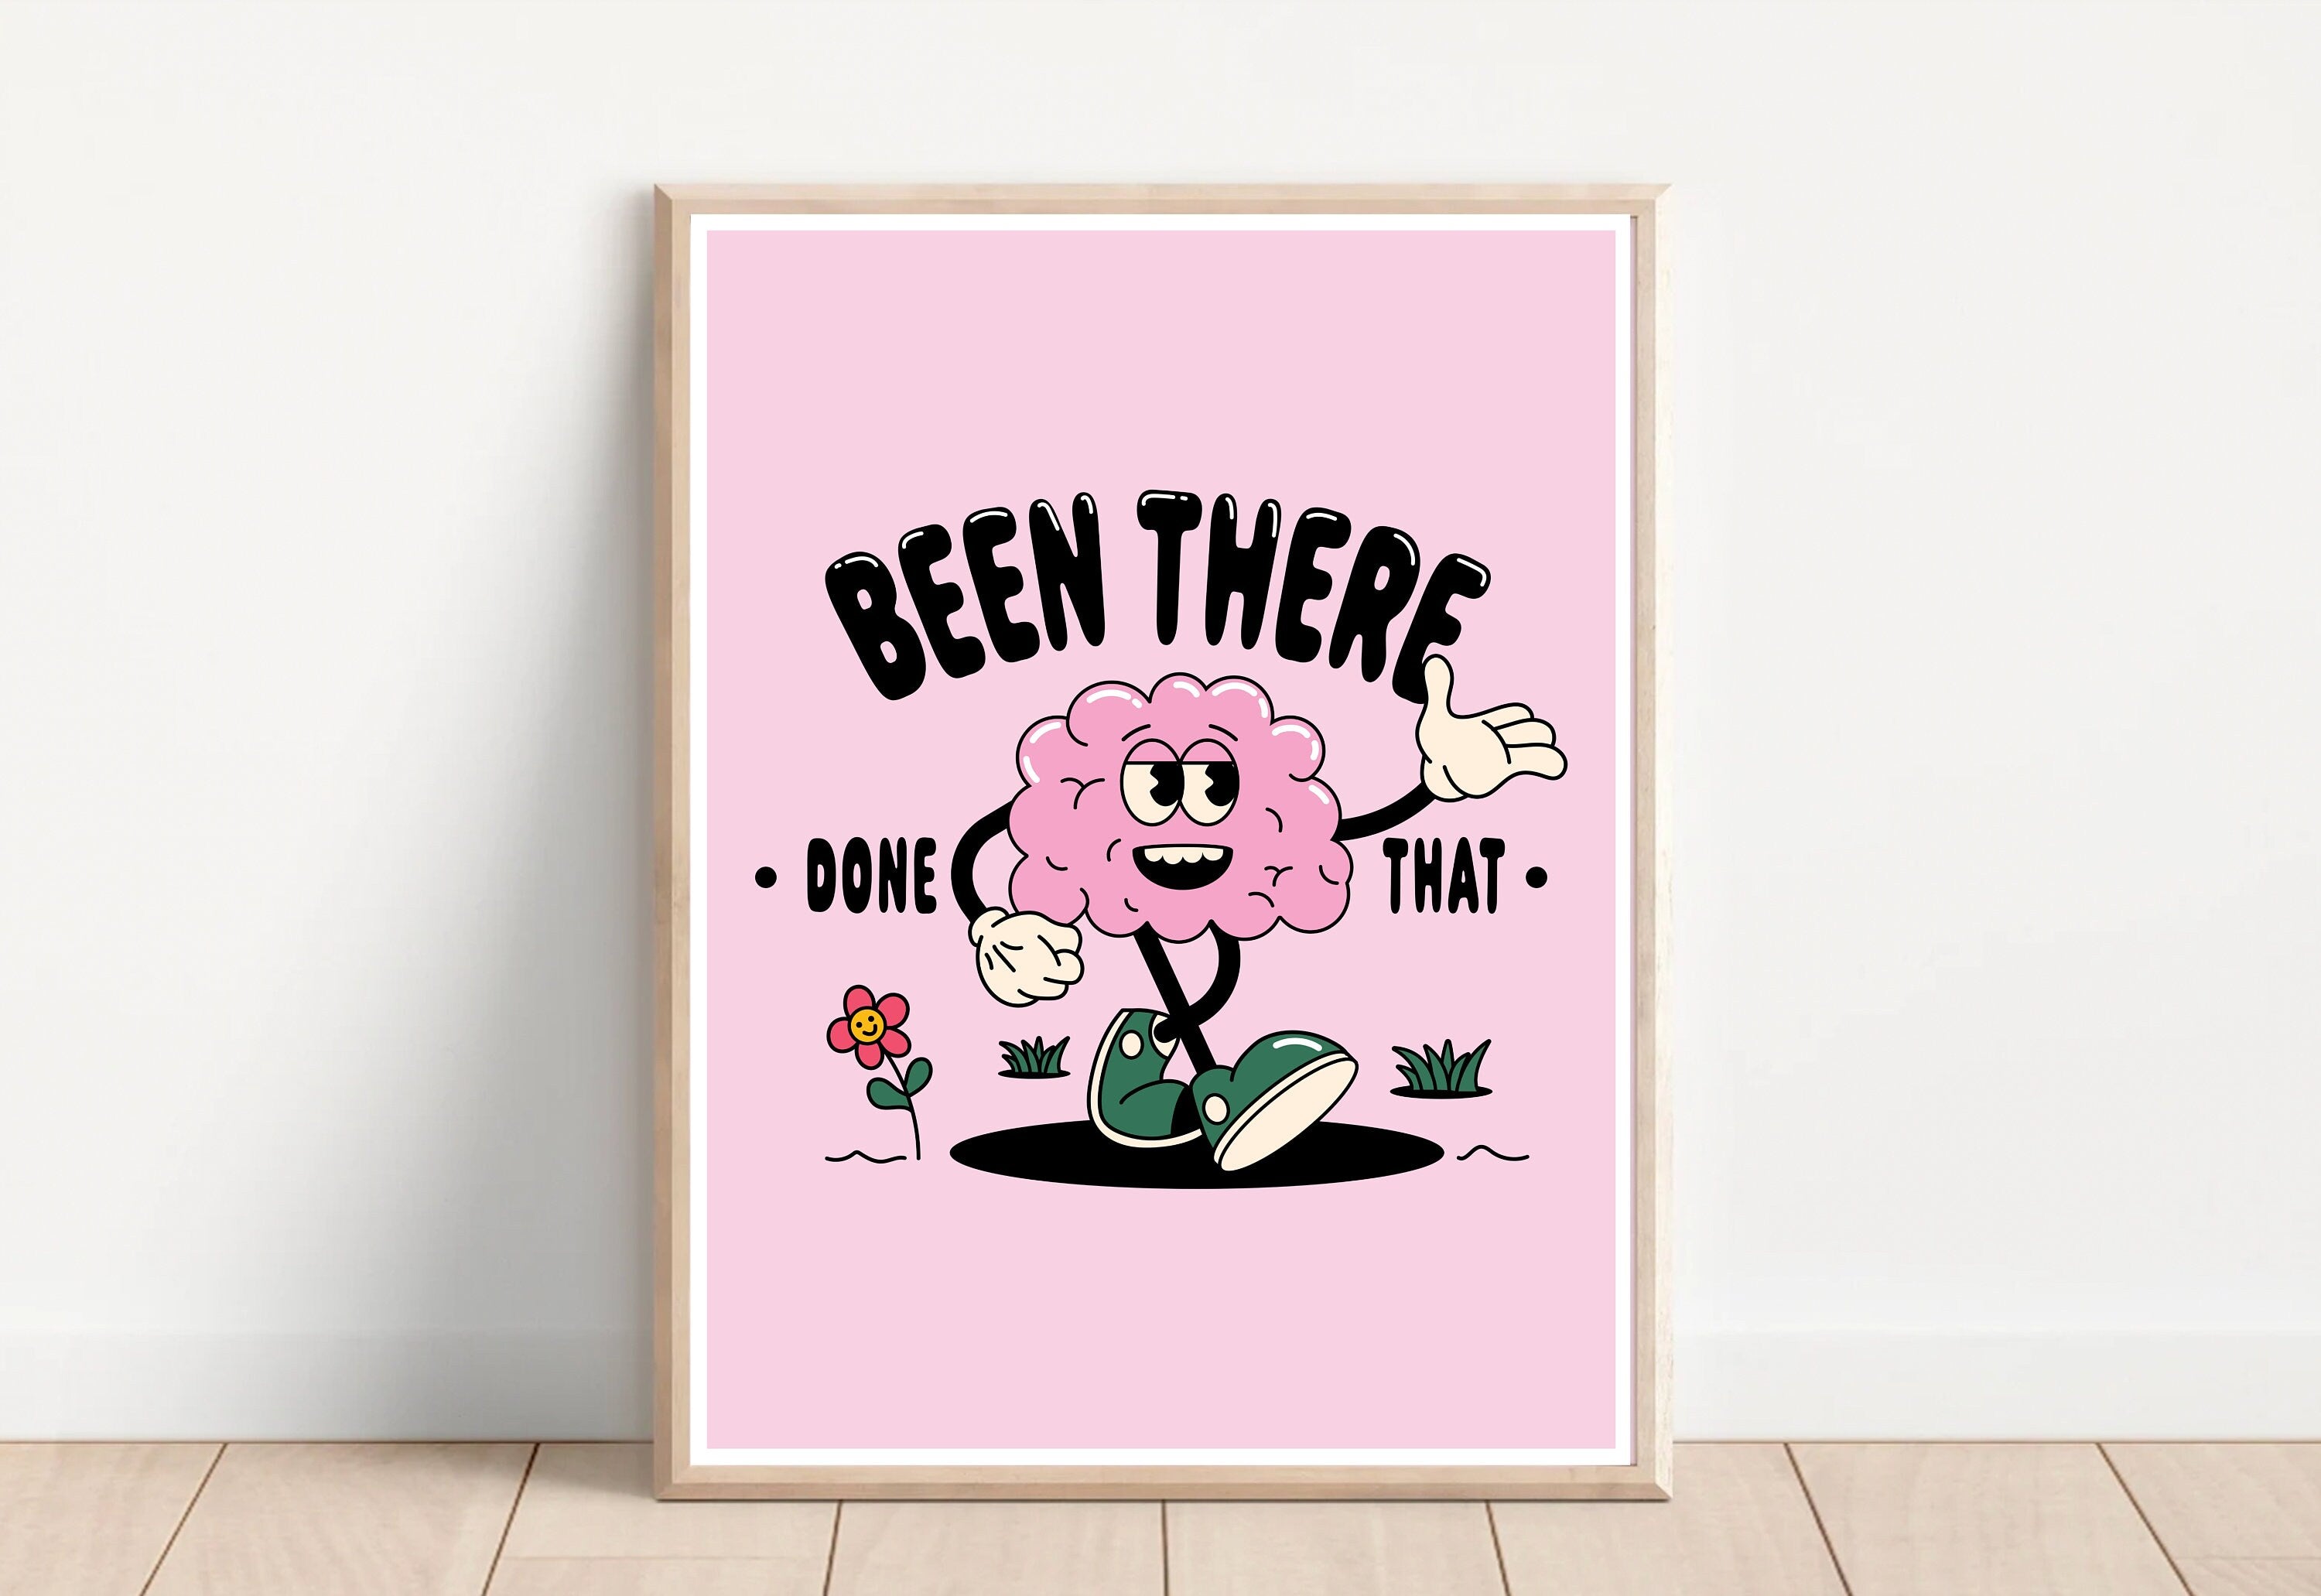 Unique 'Been There Done That' digital art print with bold typography and creative design.